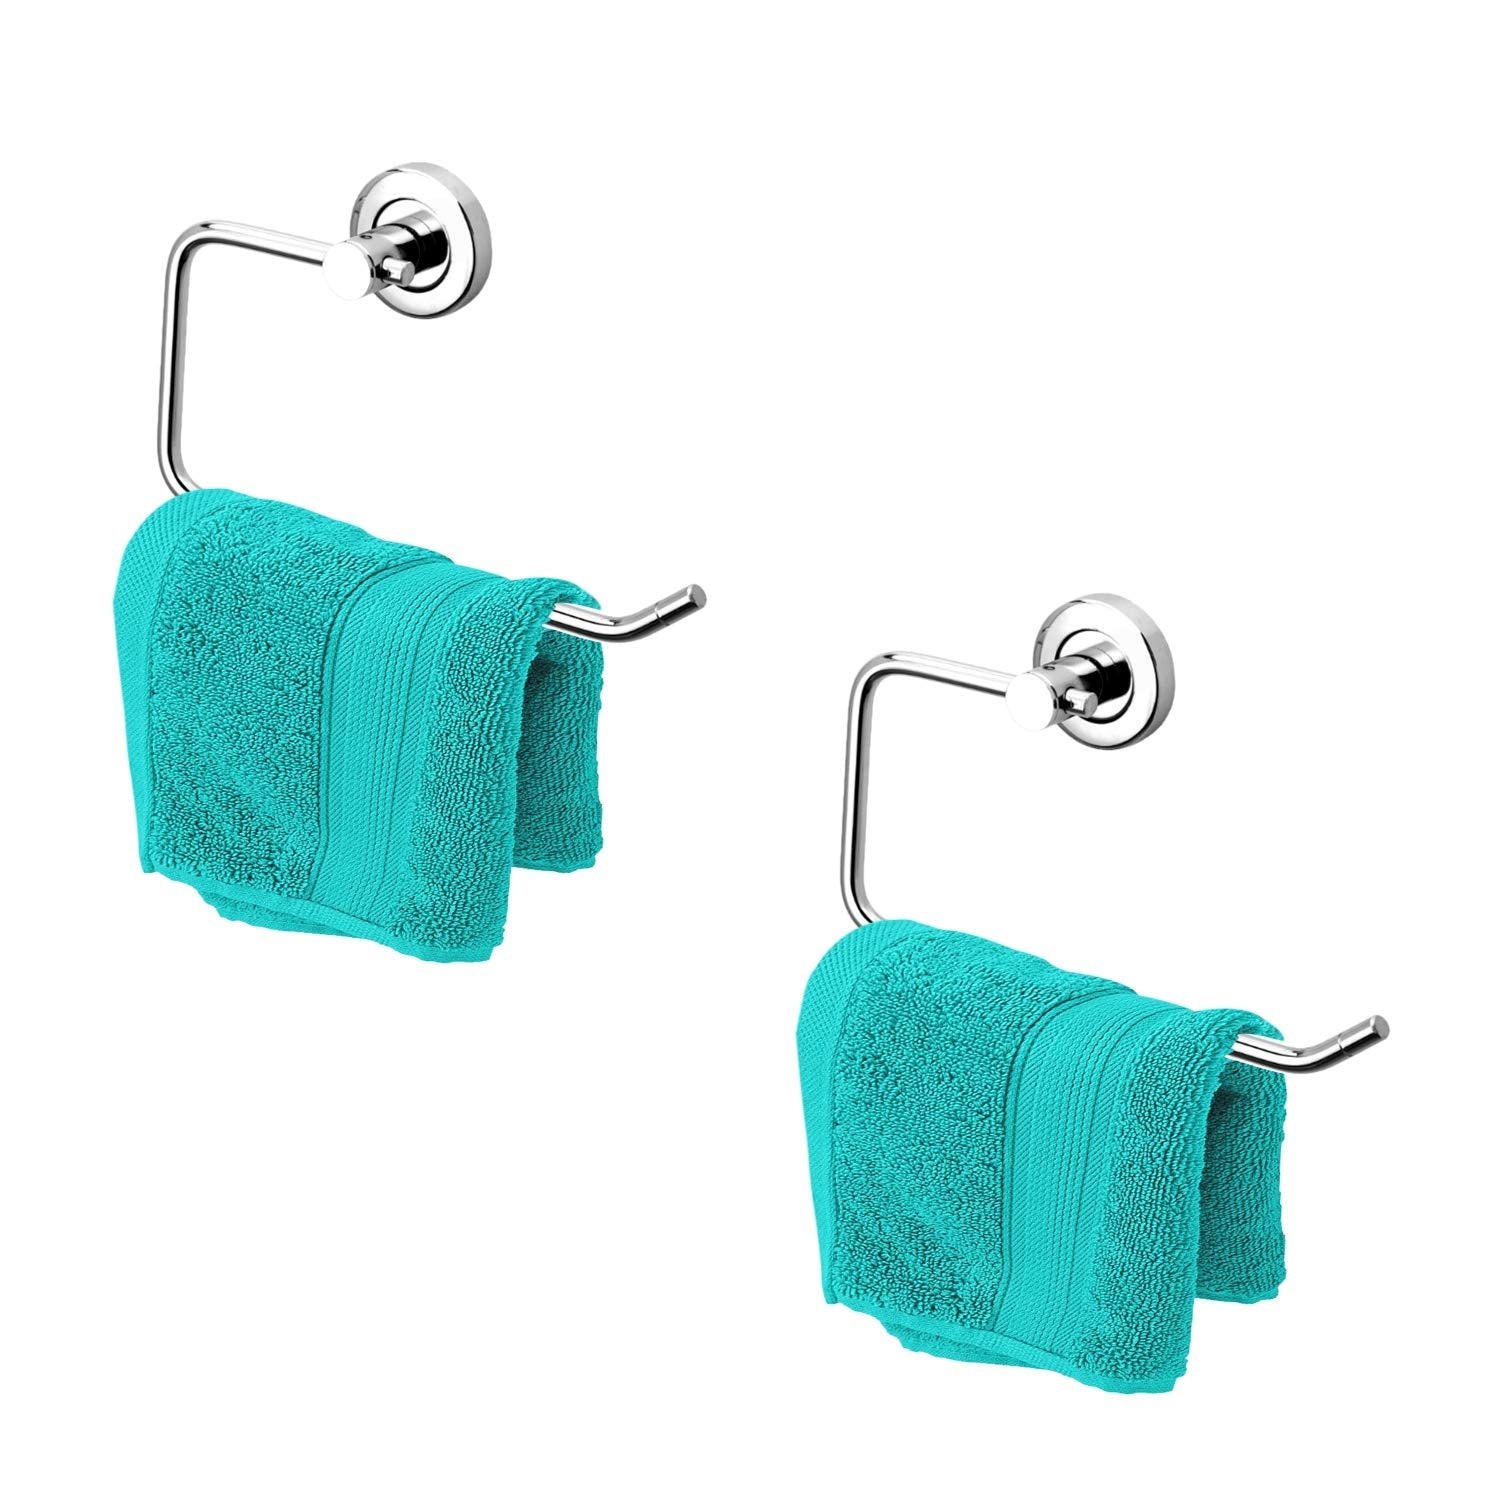 Plantex Stainless Steel Towel Ring for Bathroom/Wash Basin/Napkin-Towel Hanger/Bathroom Accessories (Chrome-Half Square) - Pack of 2